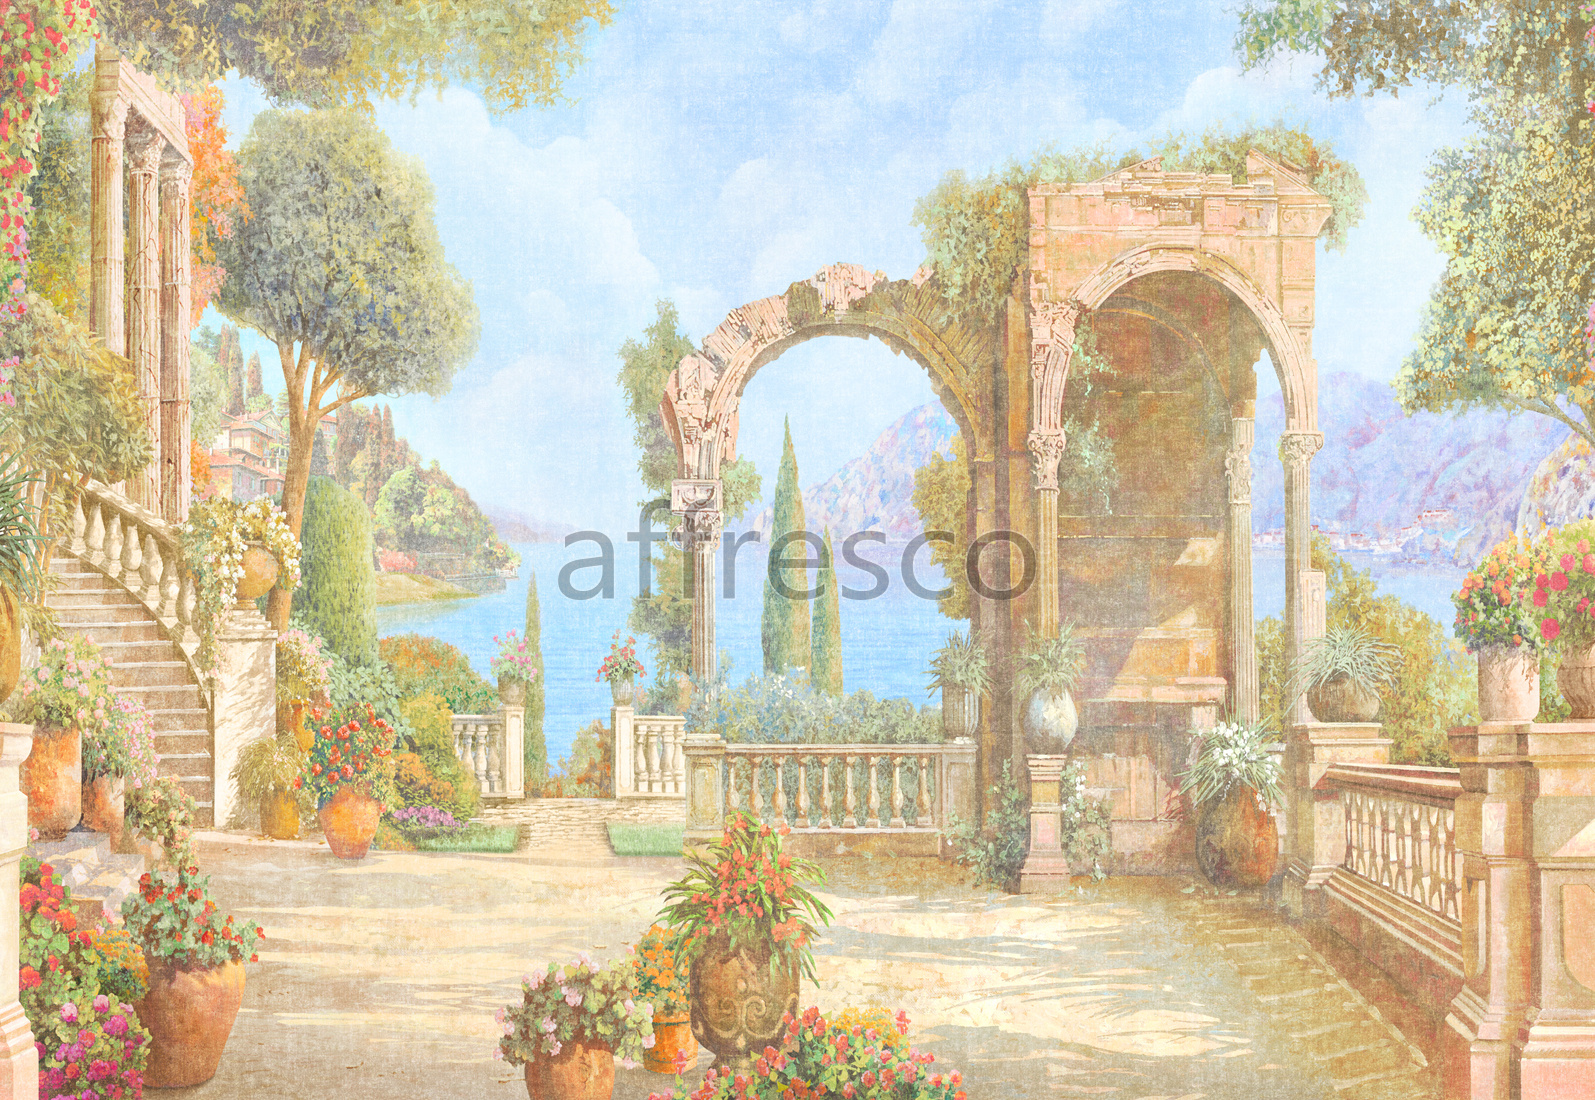 ID135720 | Picturesque scenery | Classic arches | Affresco Factory